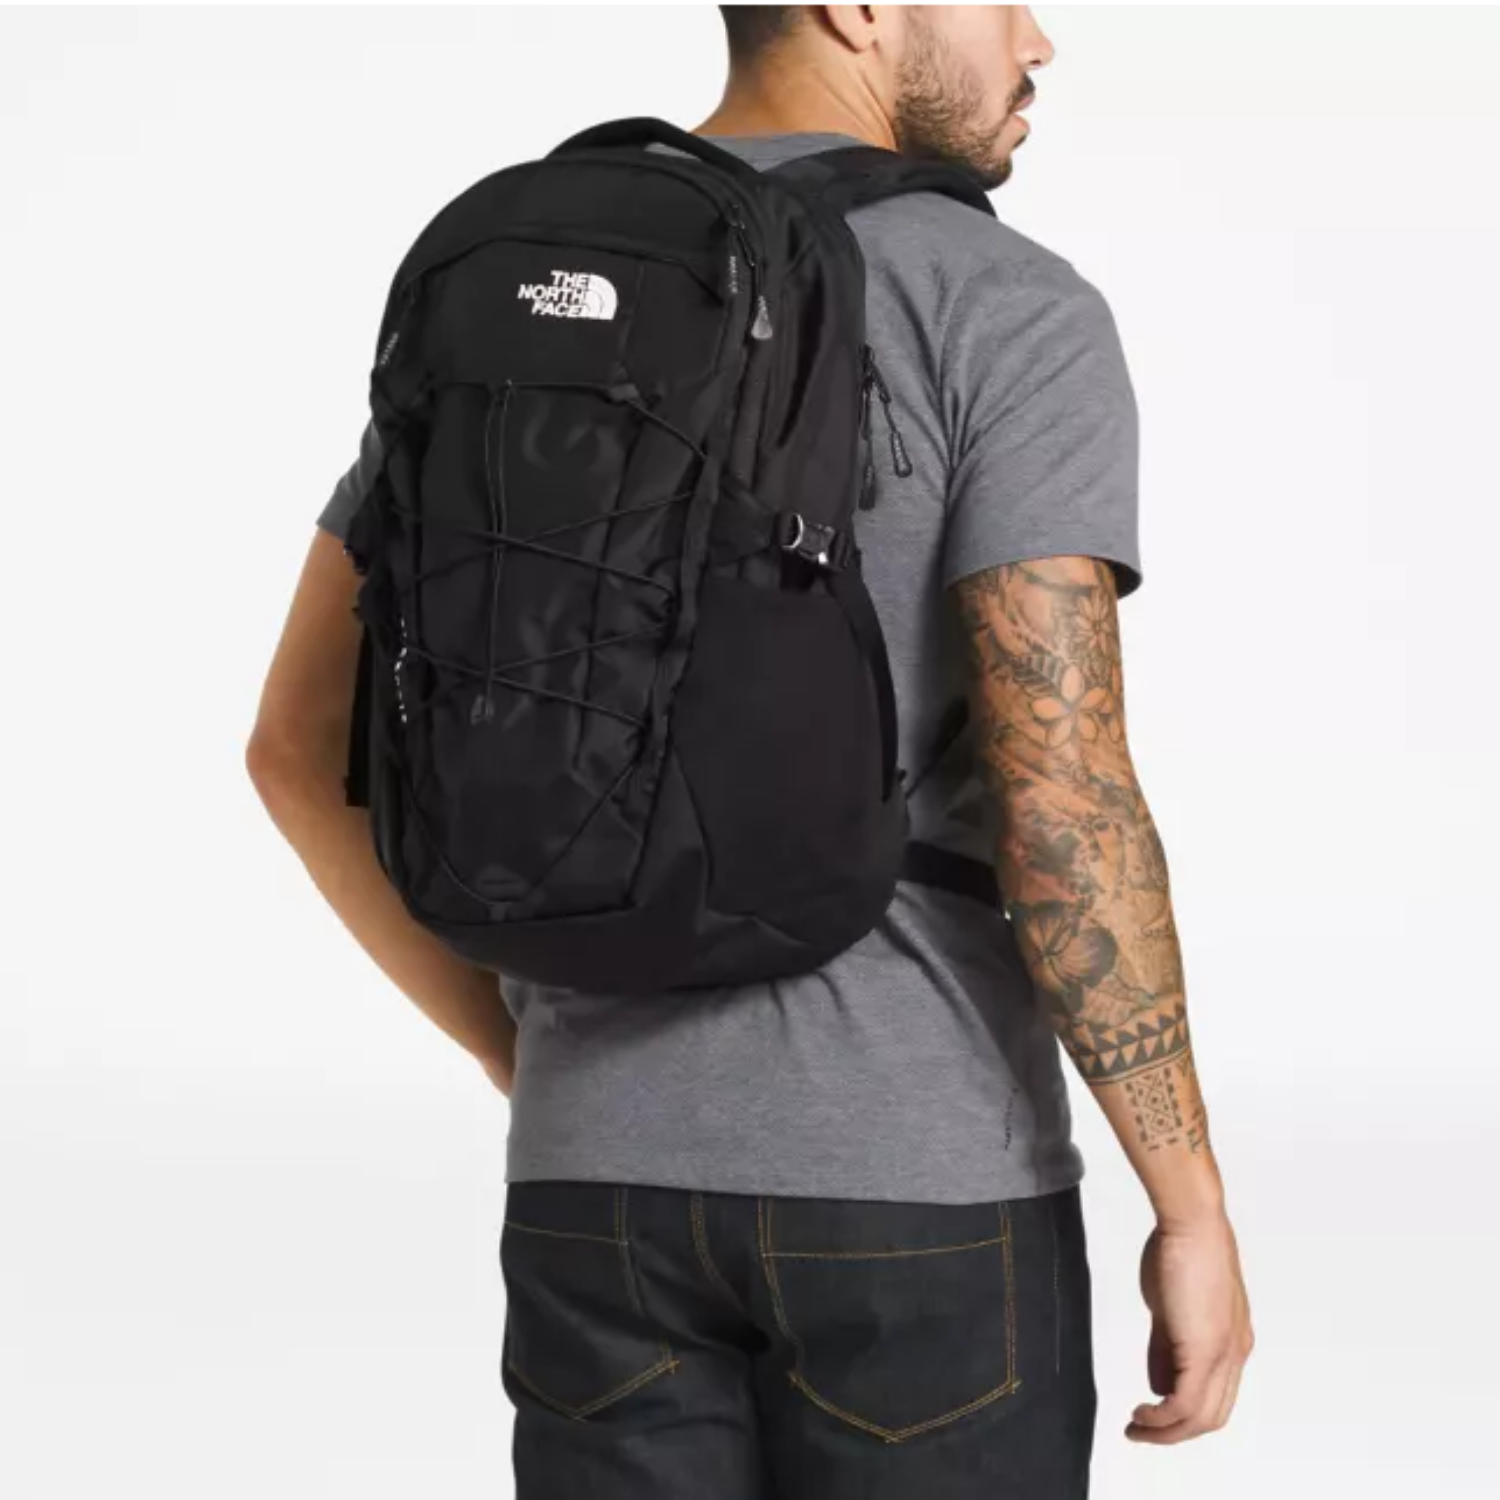 the nort face backpack